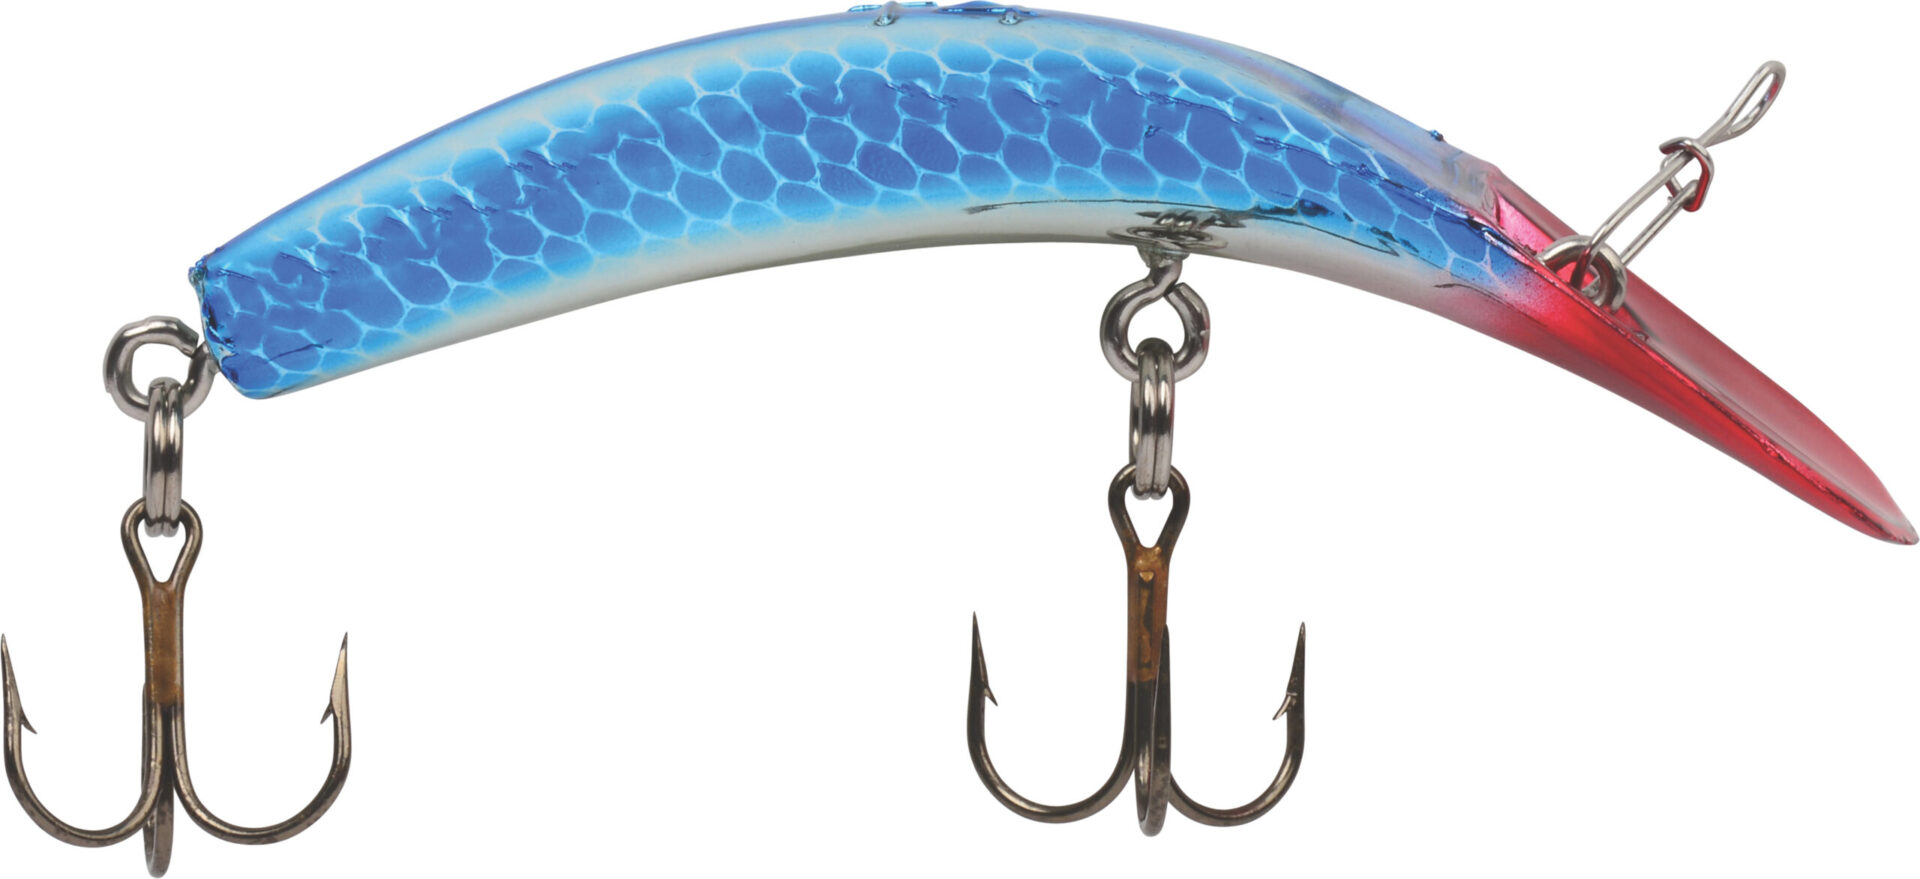 https://www.yakimabait.com/wp-content/uploads/2019/06/products-FLAT-FISH-STANDARD-RIGGING-X4-T-60-scaled.jpg